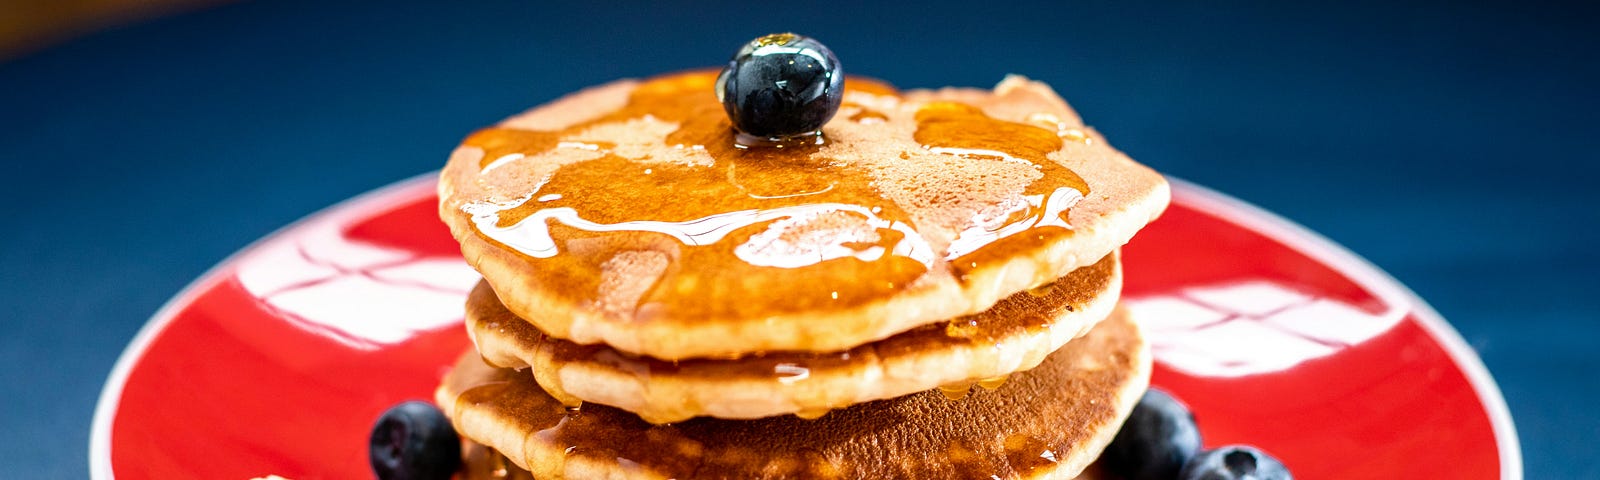 Pancakes on a plate with blueberries and banana.